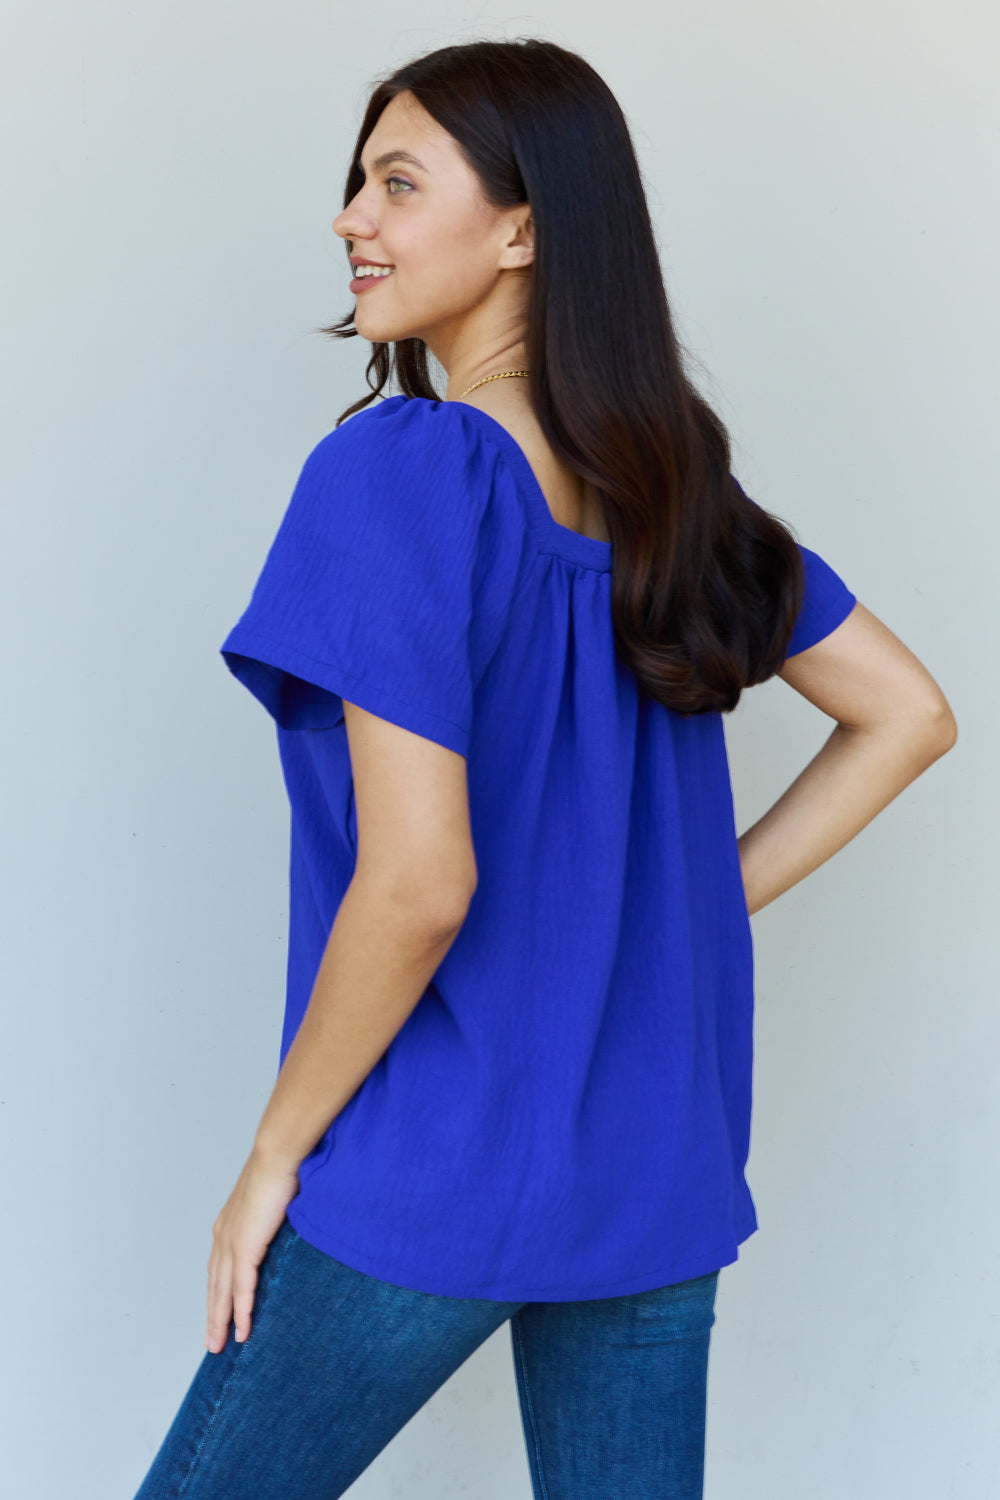 Ninexis Keep Me Close Square Neck Short Sleeve Blouse in Royal  Krazy Heart Designs Boutique   